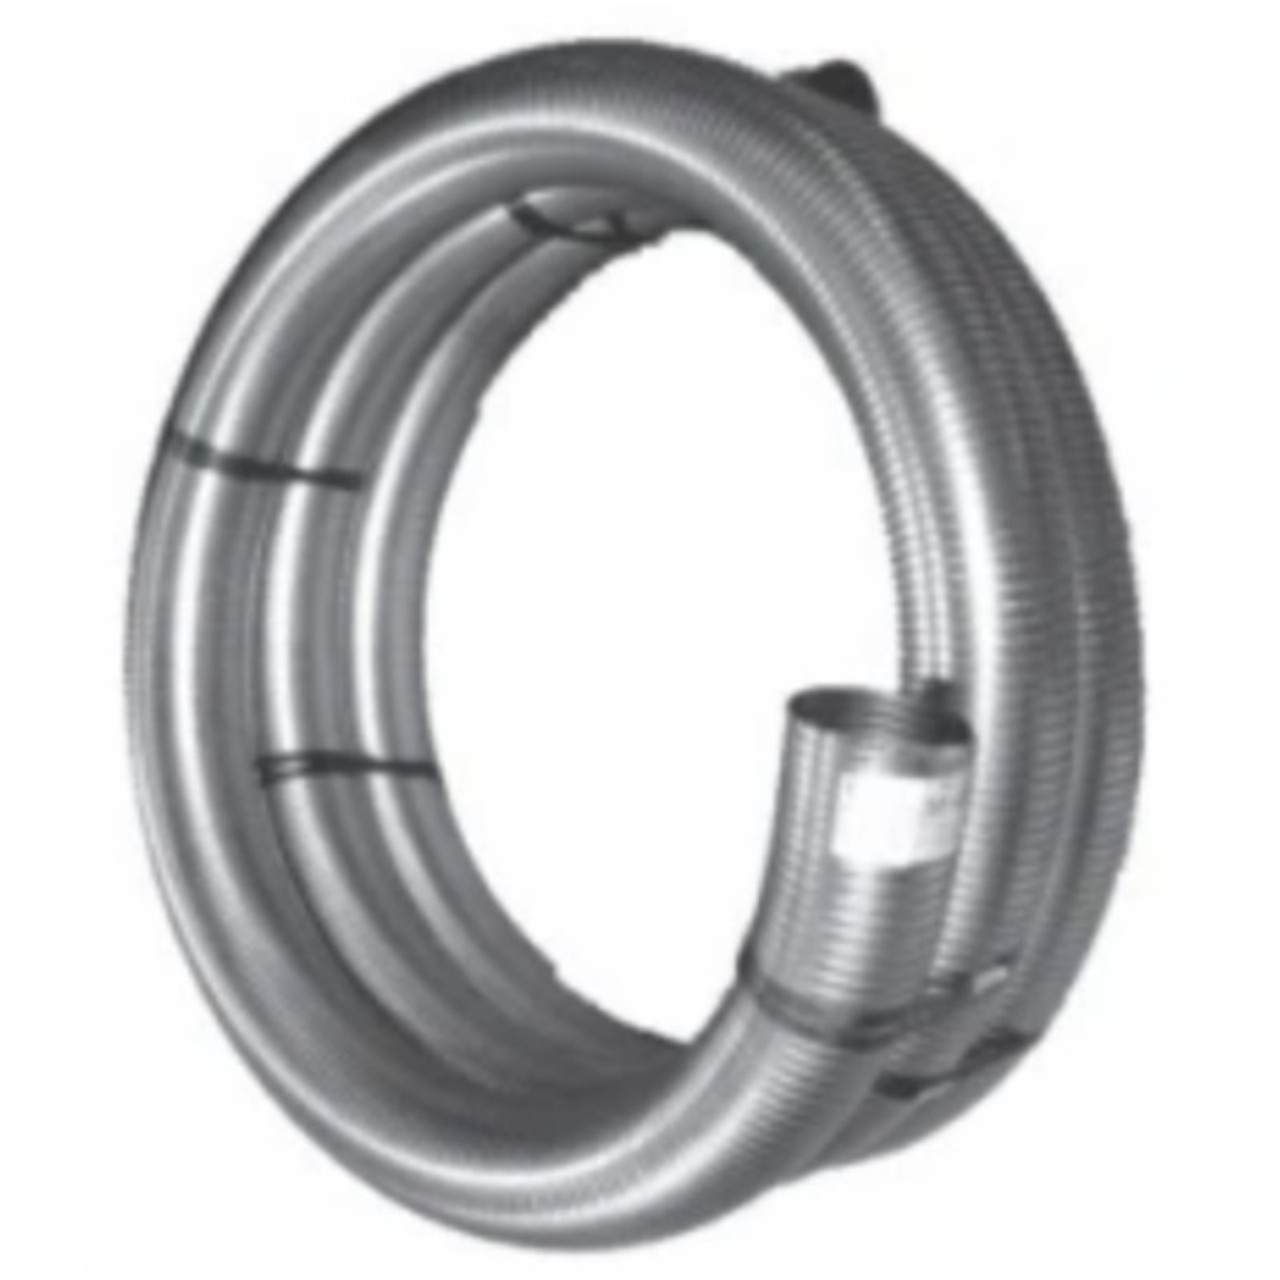 4 Galvanized Steel Exhaust Flex Pipe. Sold By The Foot For Sale, Ucon, ID, 10400, 40011, 49030, 49091, FLEX400, FLX400, G15-4120, G154120,  TF400120MDGS